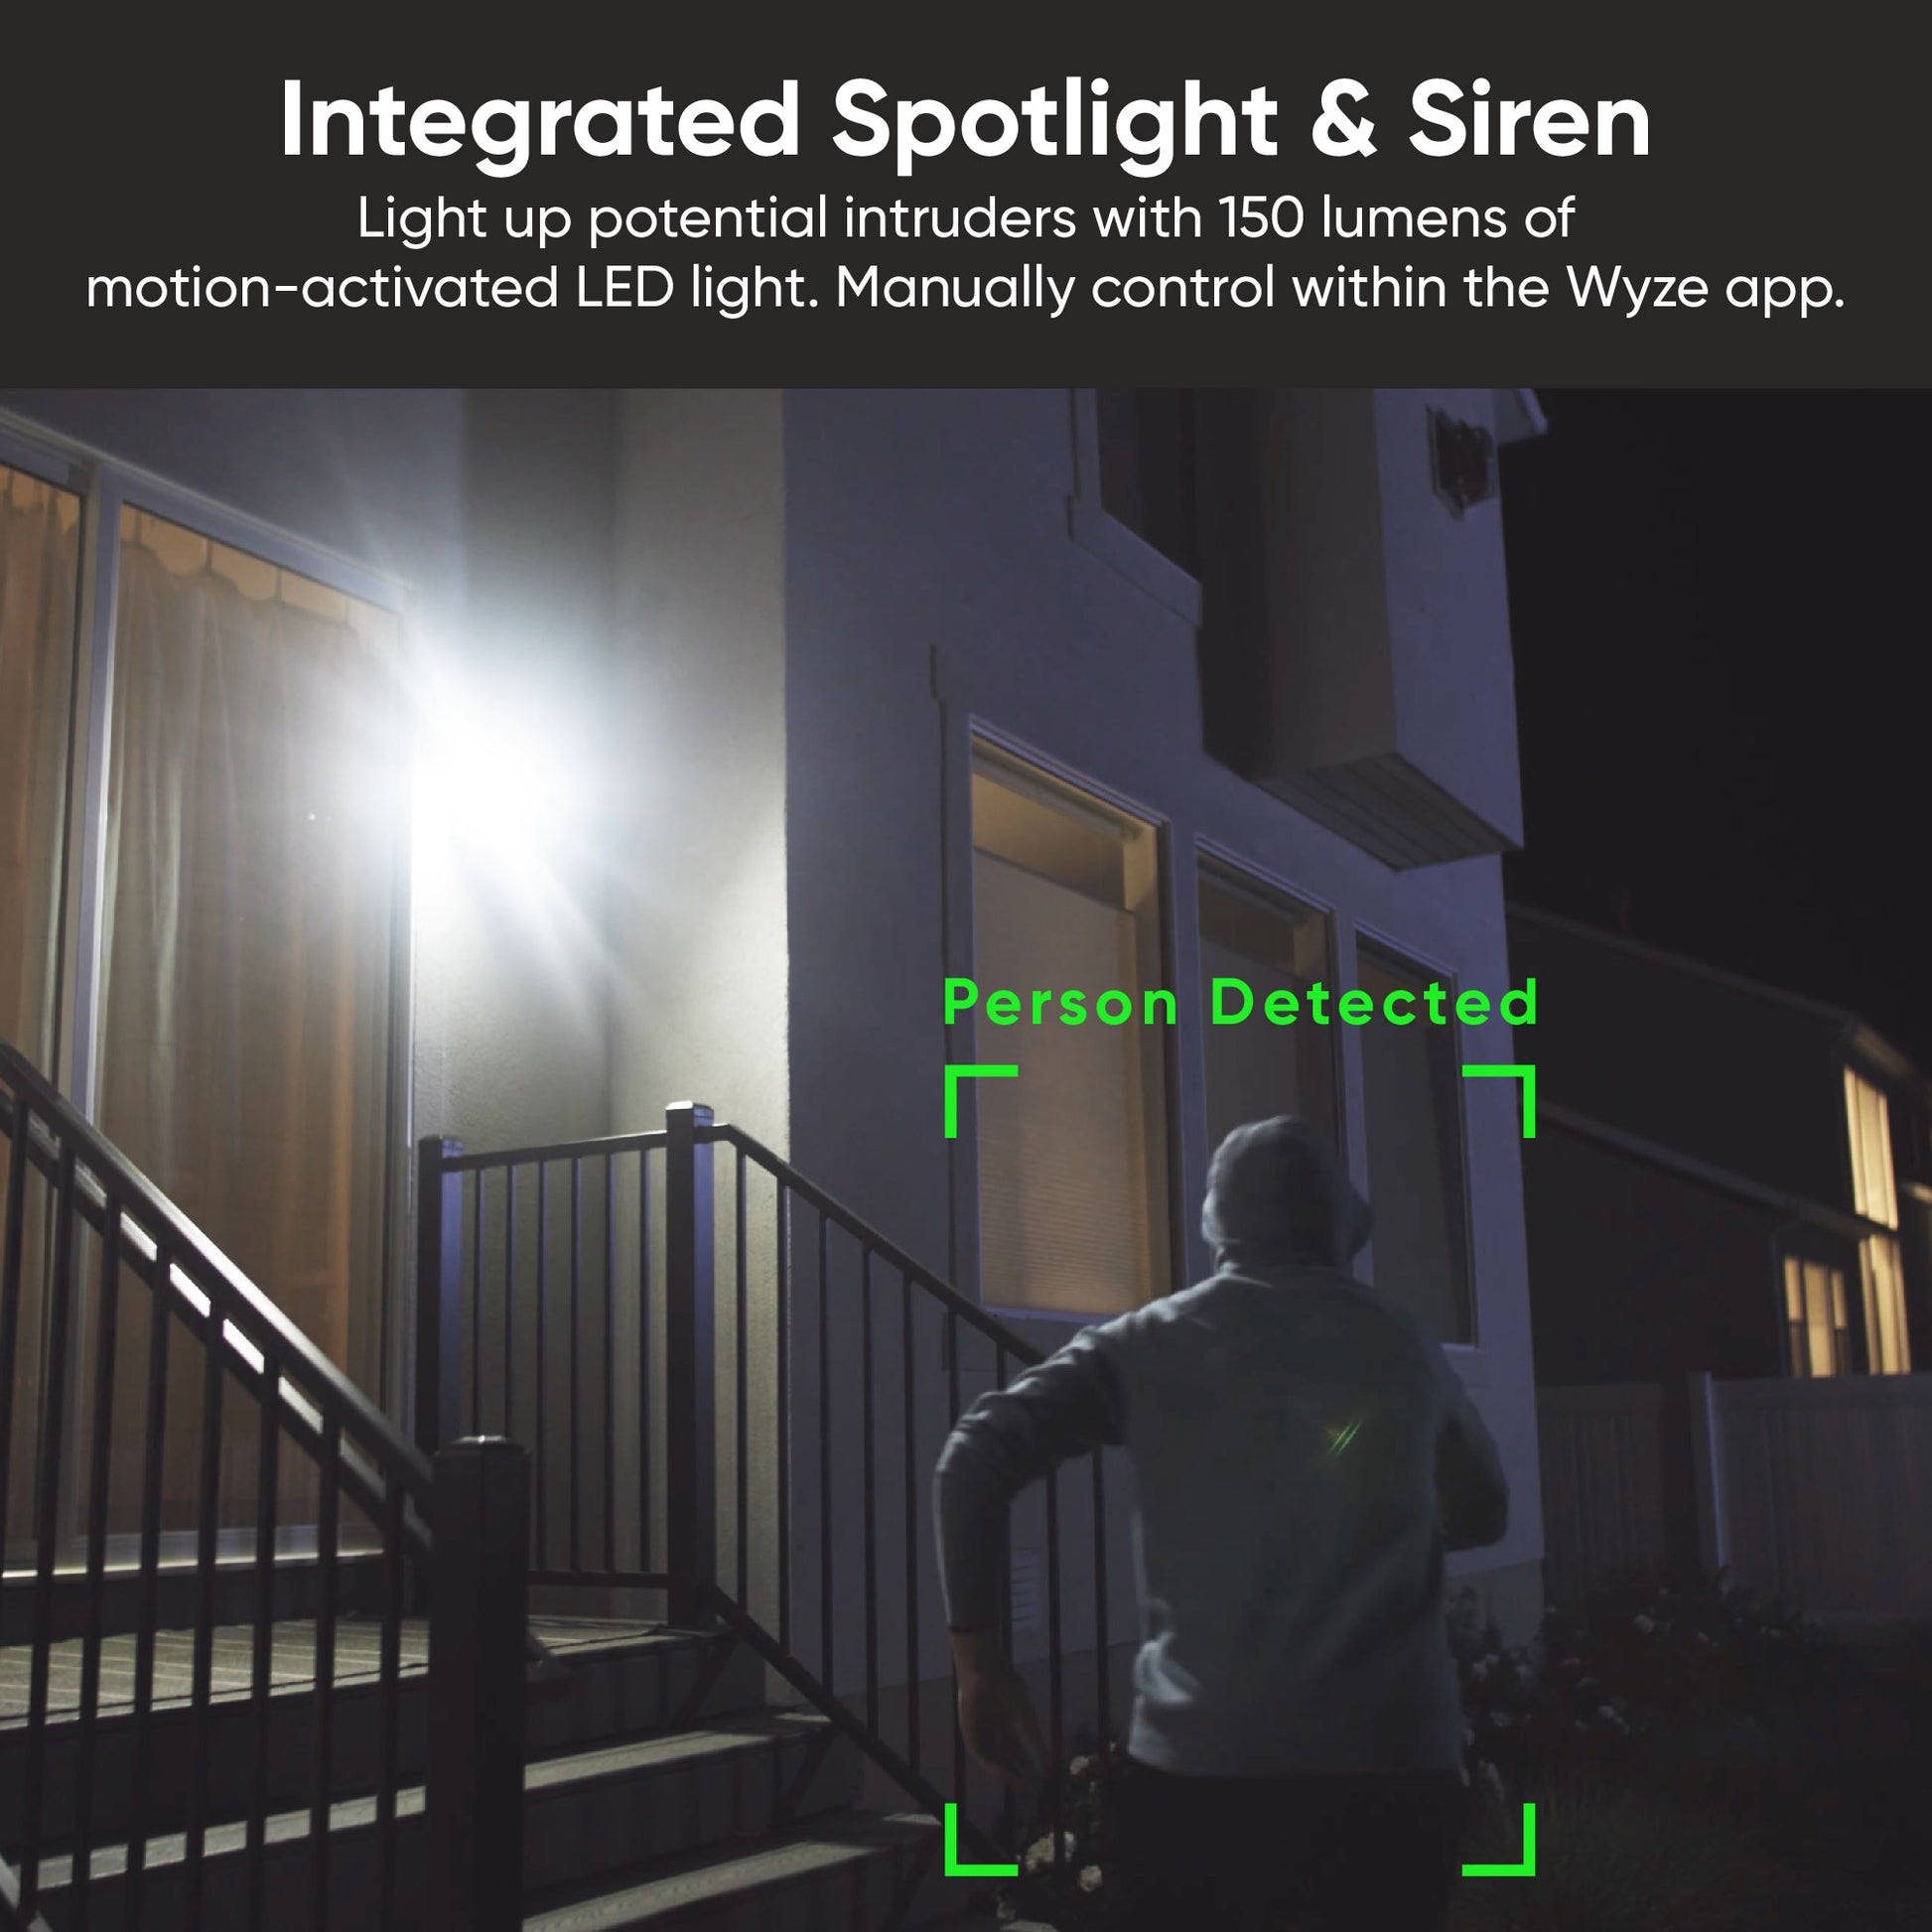 Bright spotlight is on in back porch as person runs by camera.